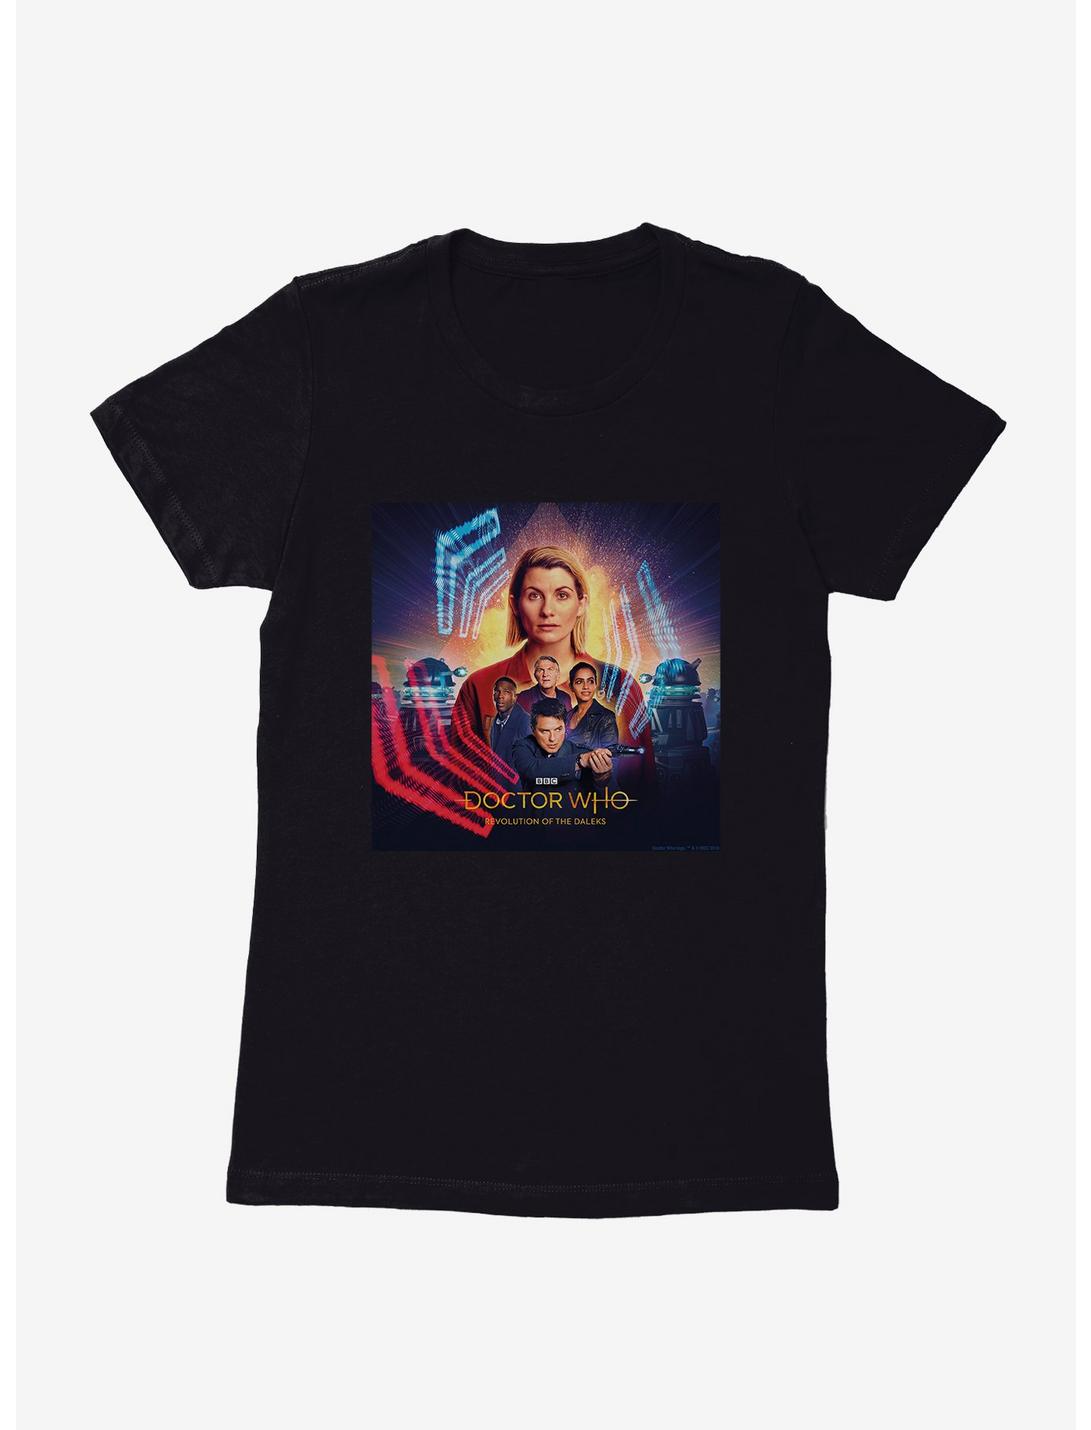 Doctor Who The Thirteenth Doctor Revolution Of The Daleks Square Poster Womens T-Shirt, , hi-res